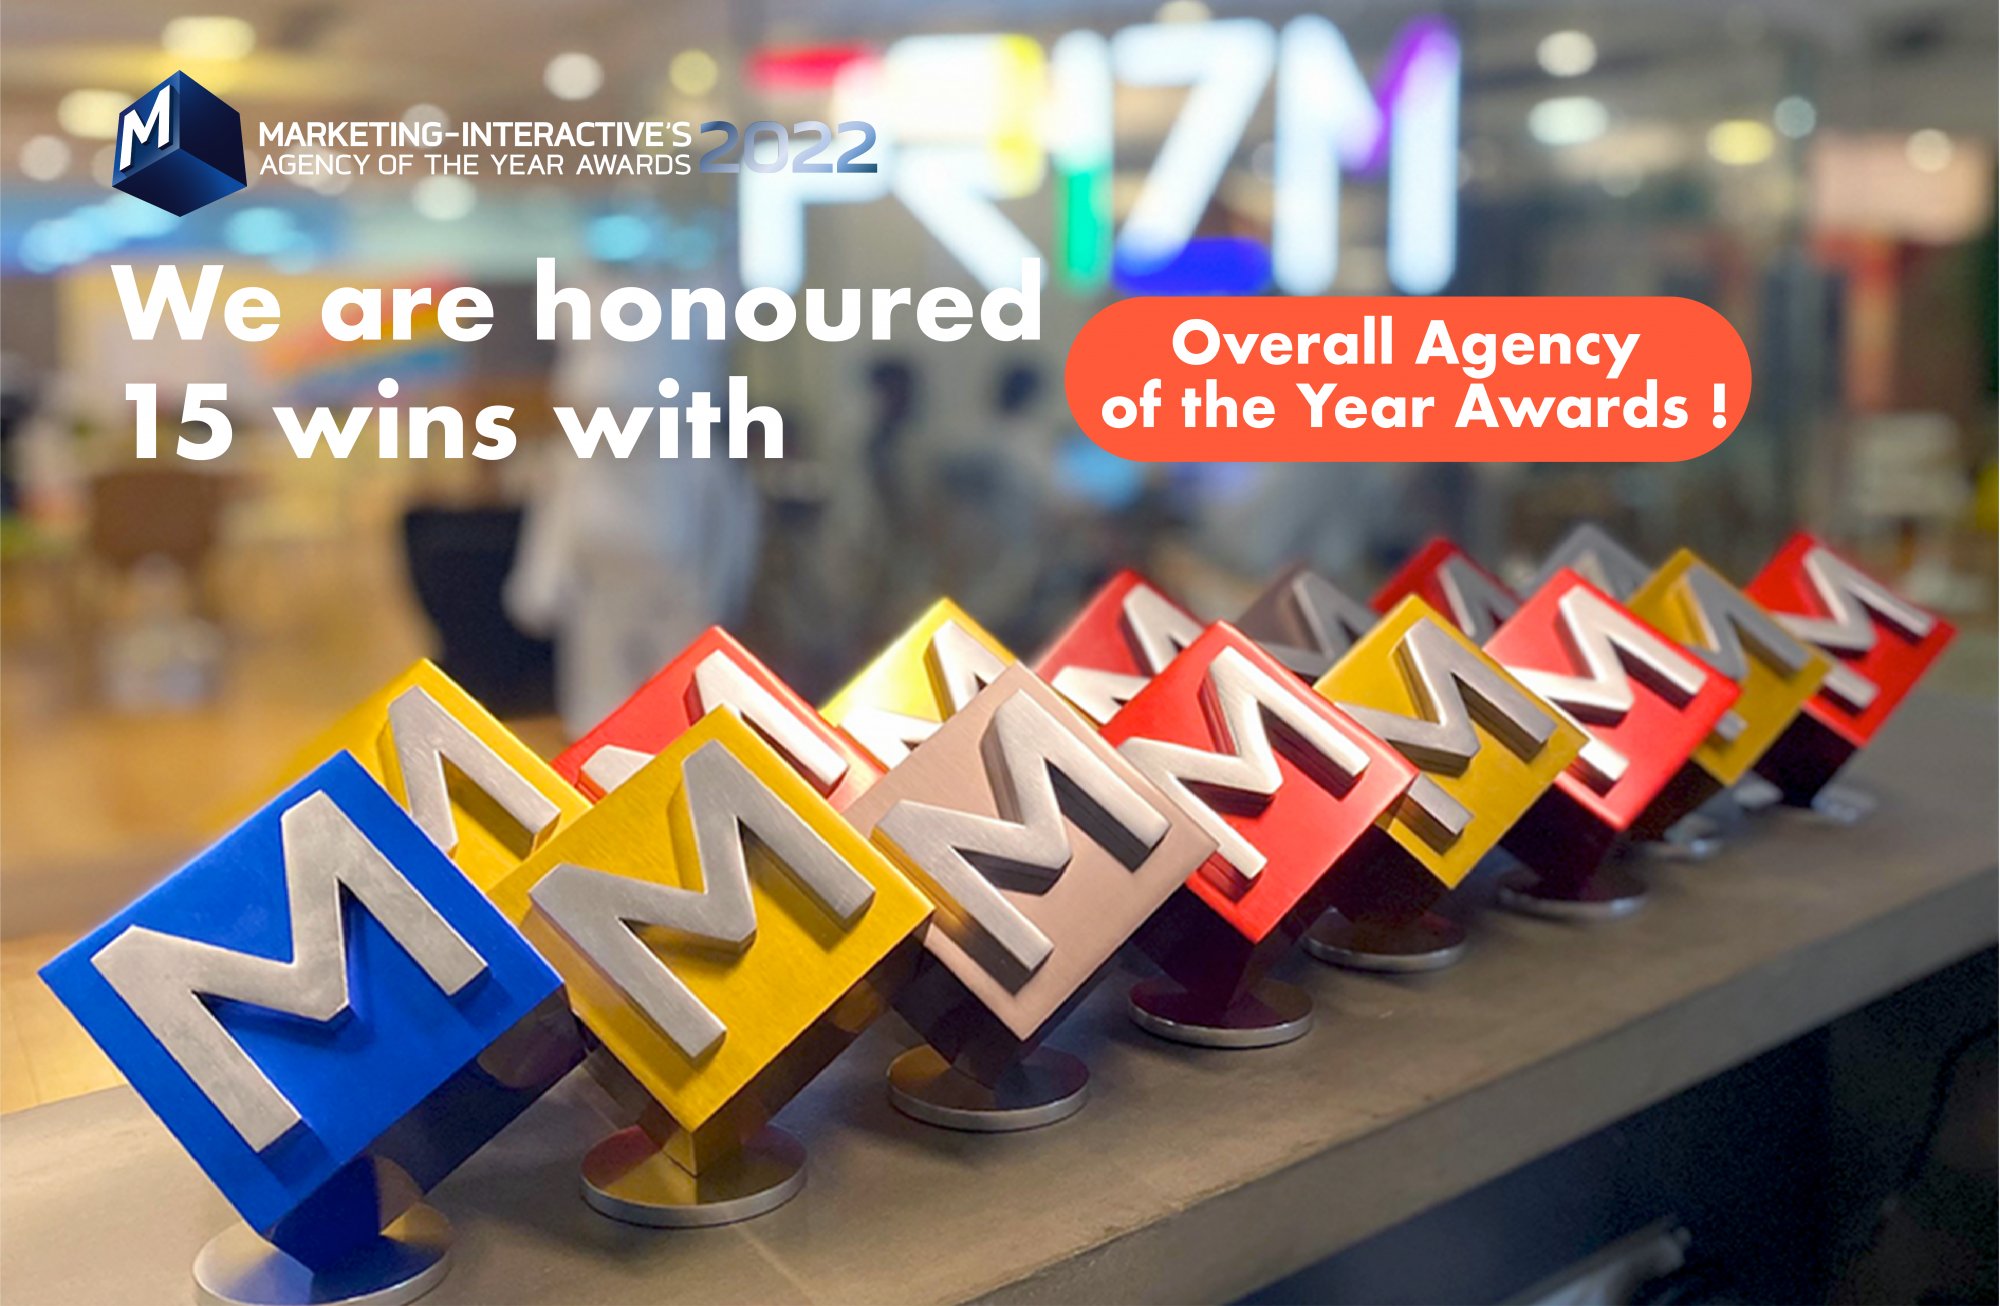 Agency of the Year Awards 2022